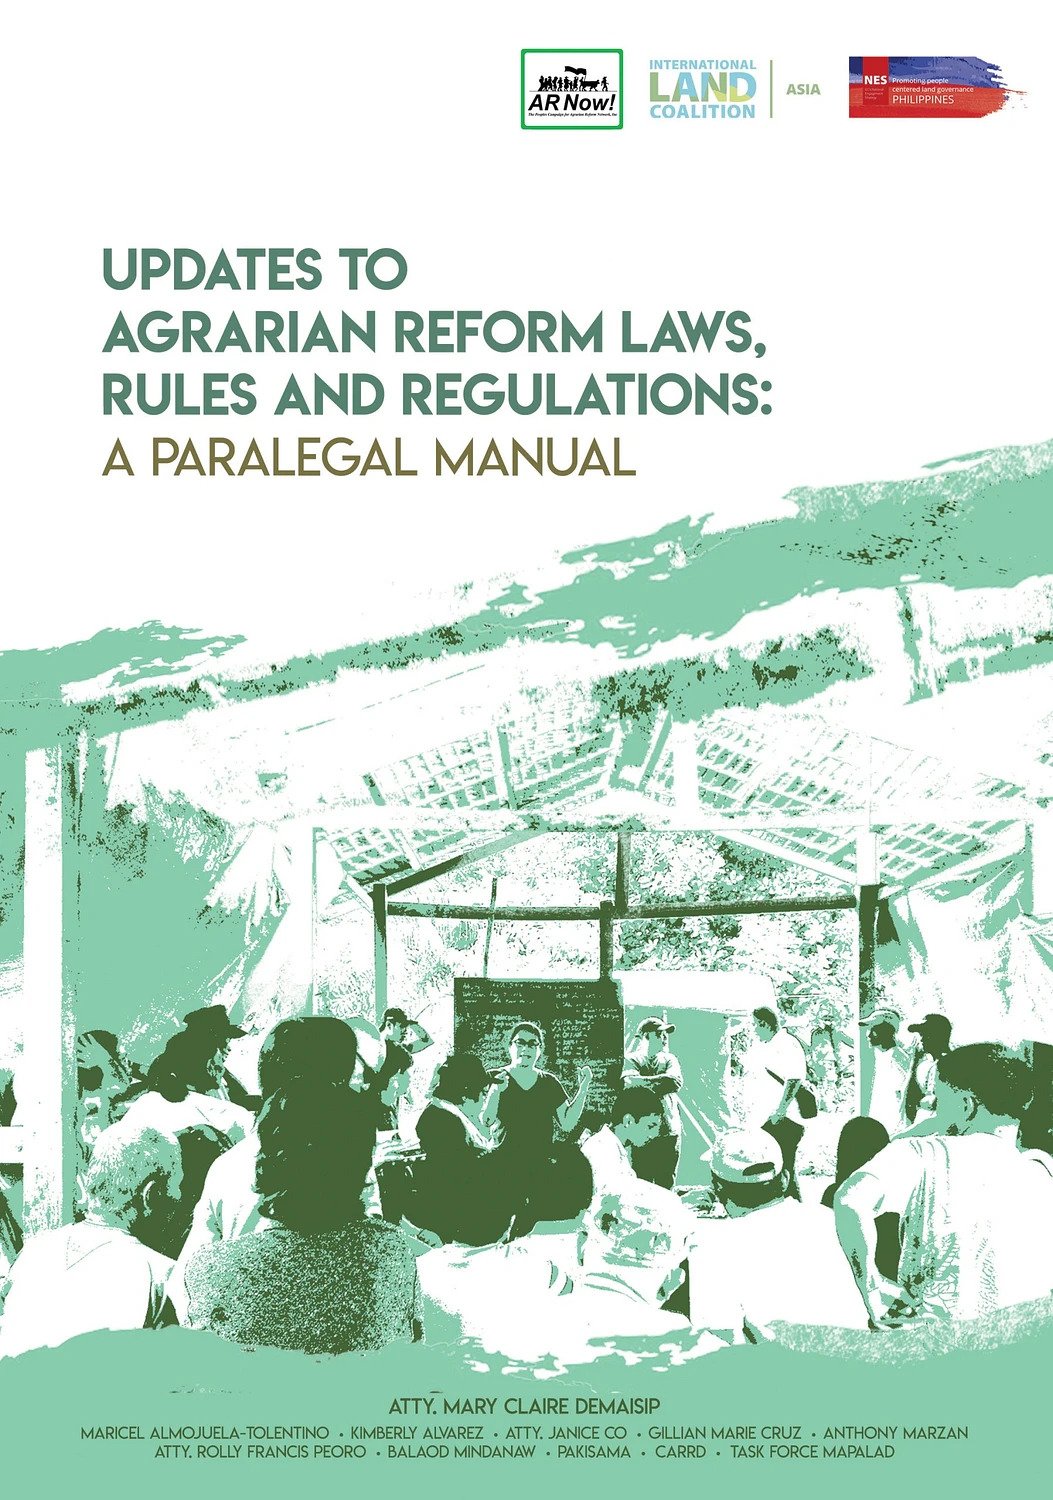 Updates to Agrarian Reform Laws, Rules, and Regulations: A Paralegal Manual